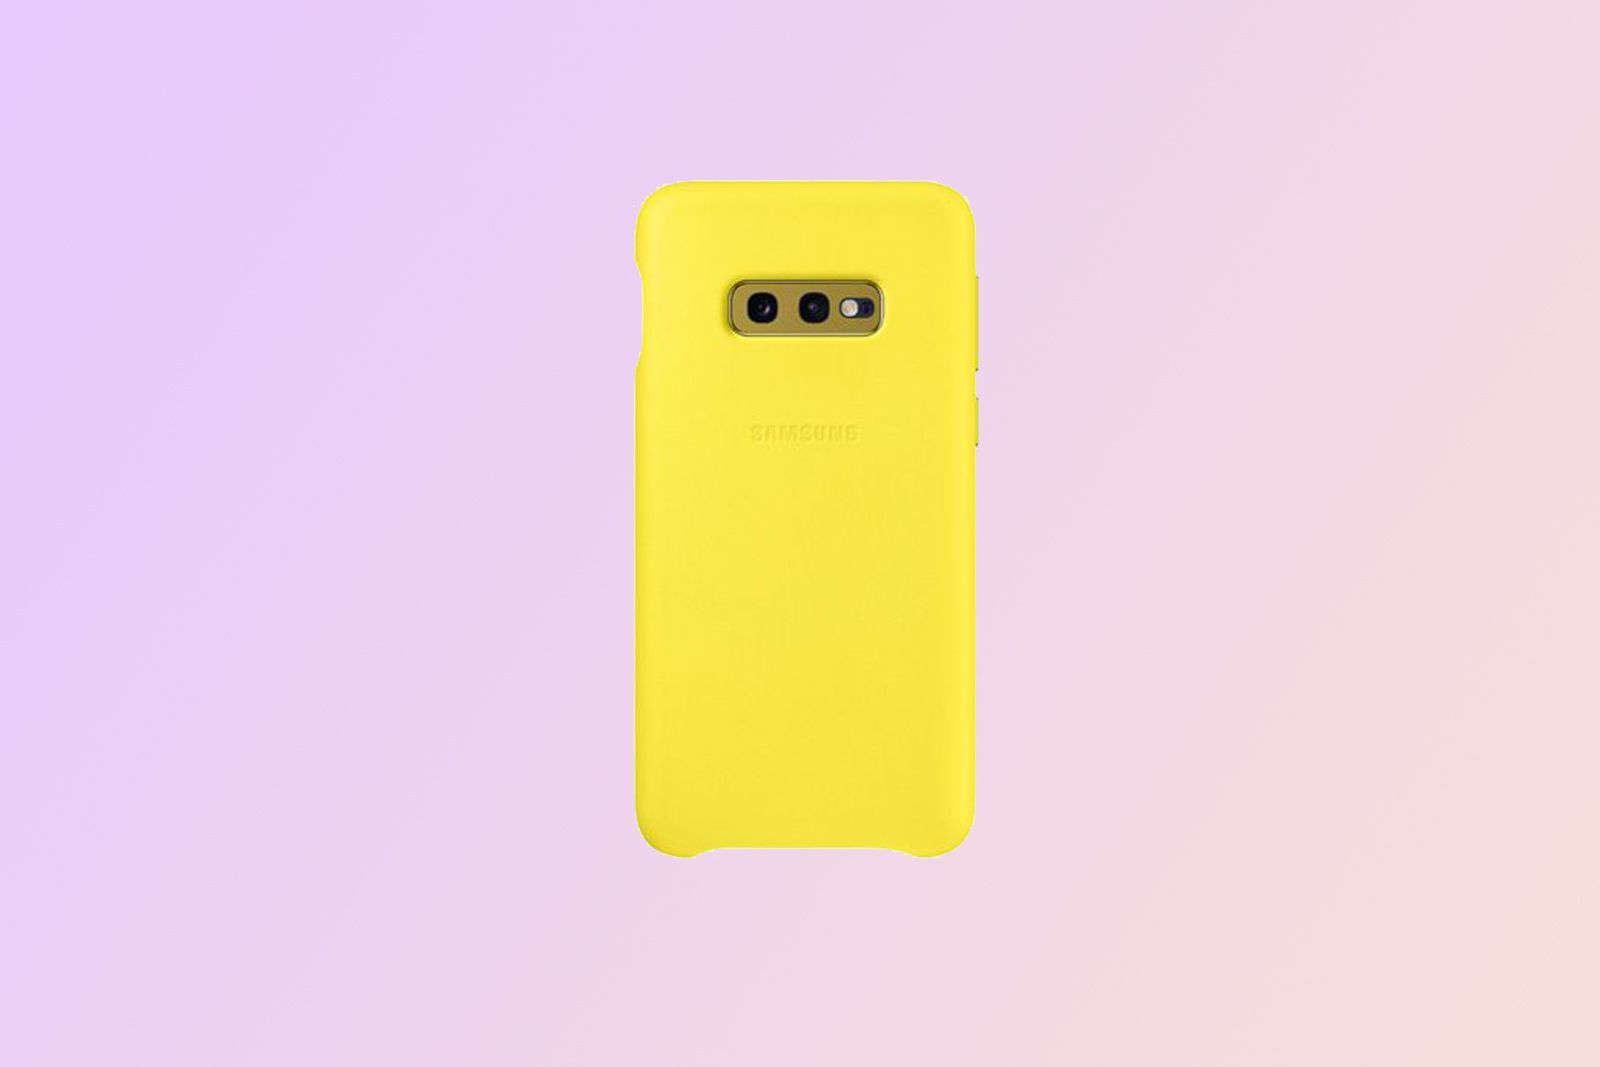 Best Galaxy S10e S10 And S10 Cases Protect Your New Samsung Device image 2